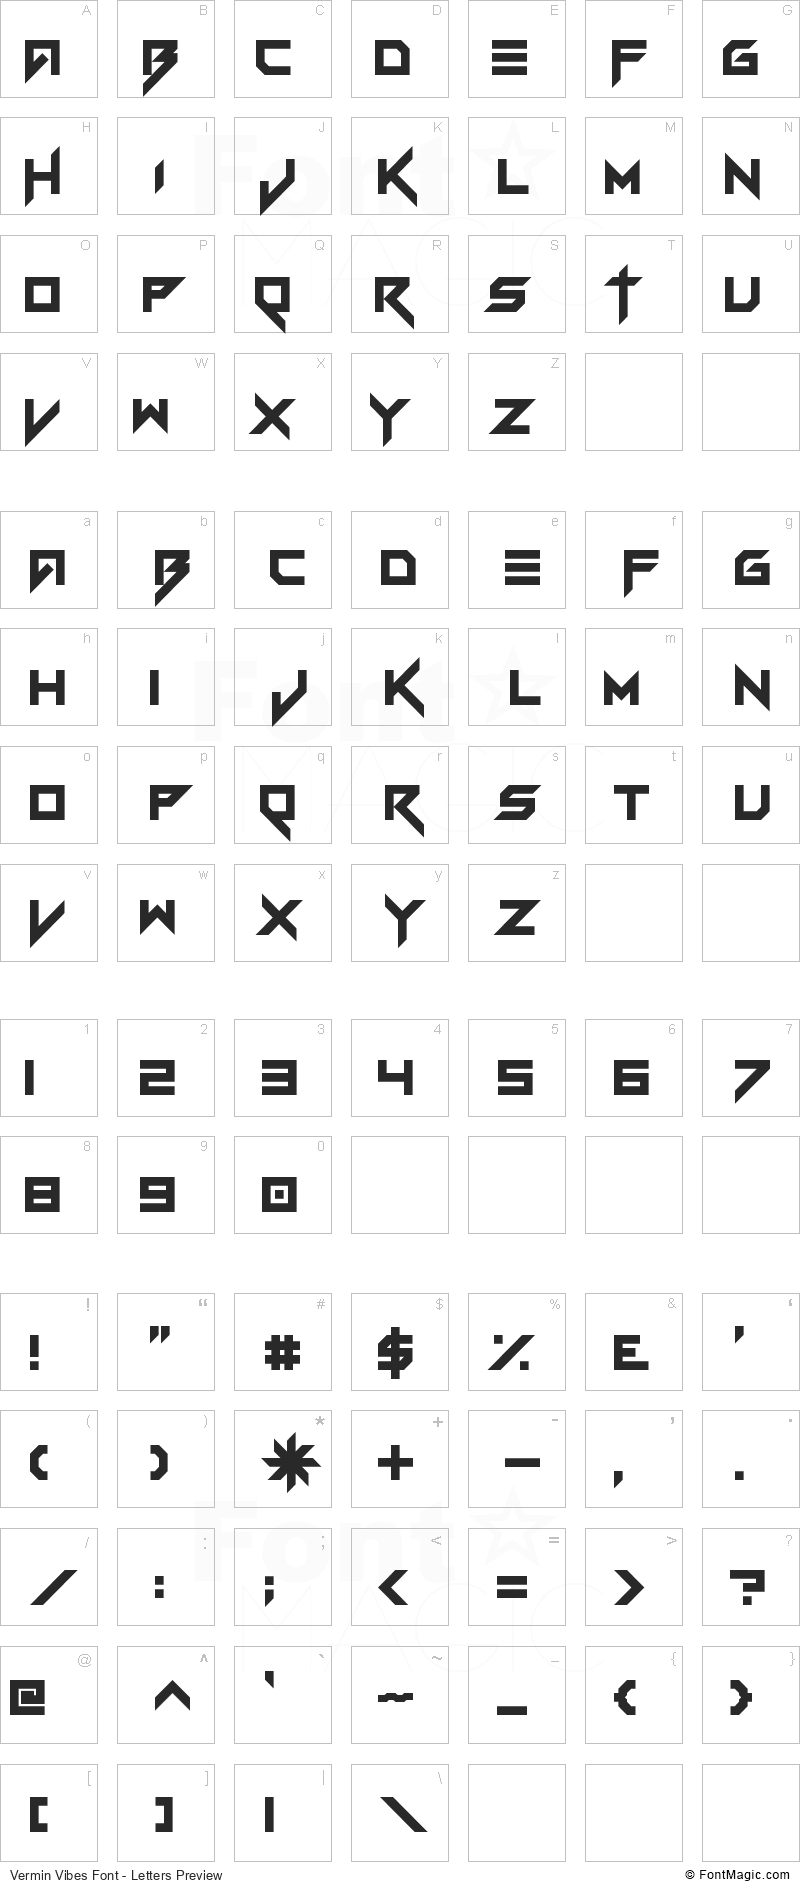 Vermin Vibes Font - All Latters Preview Chart